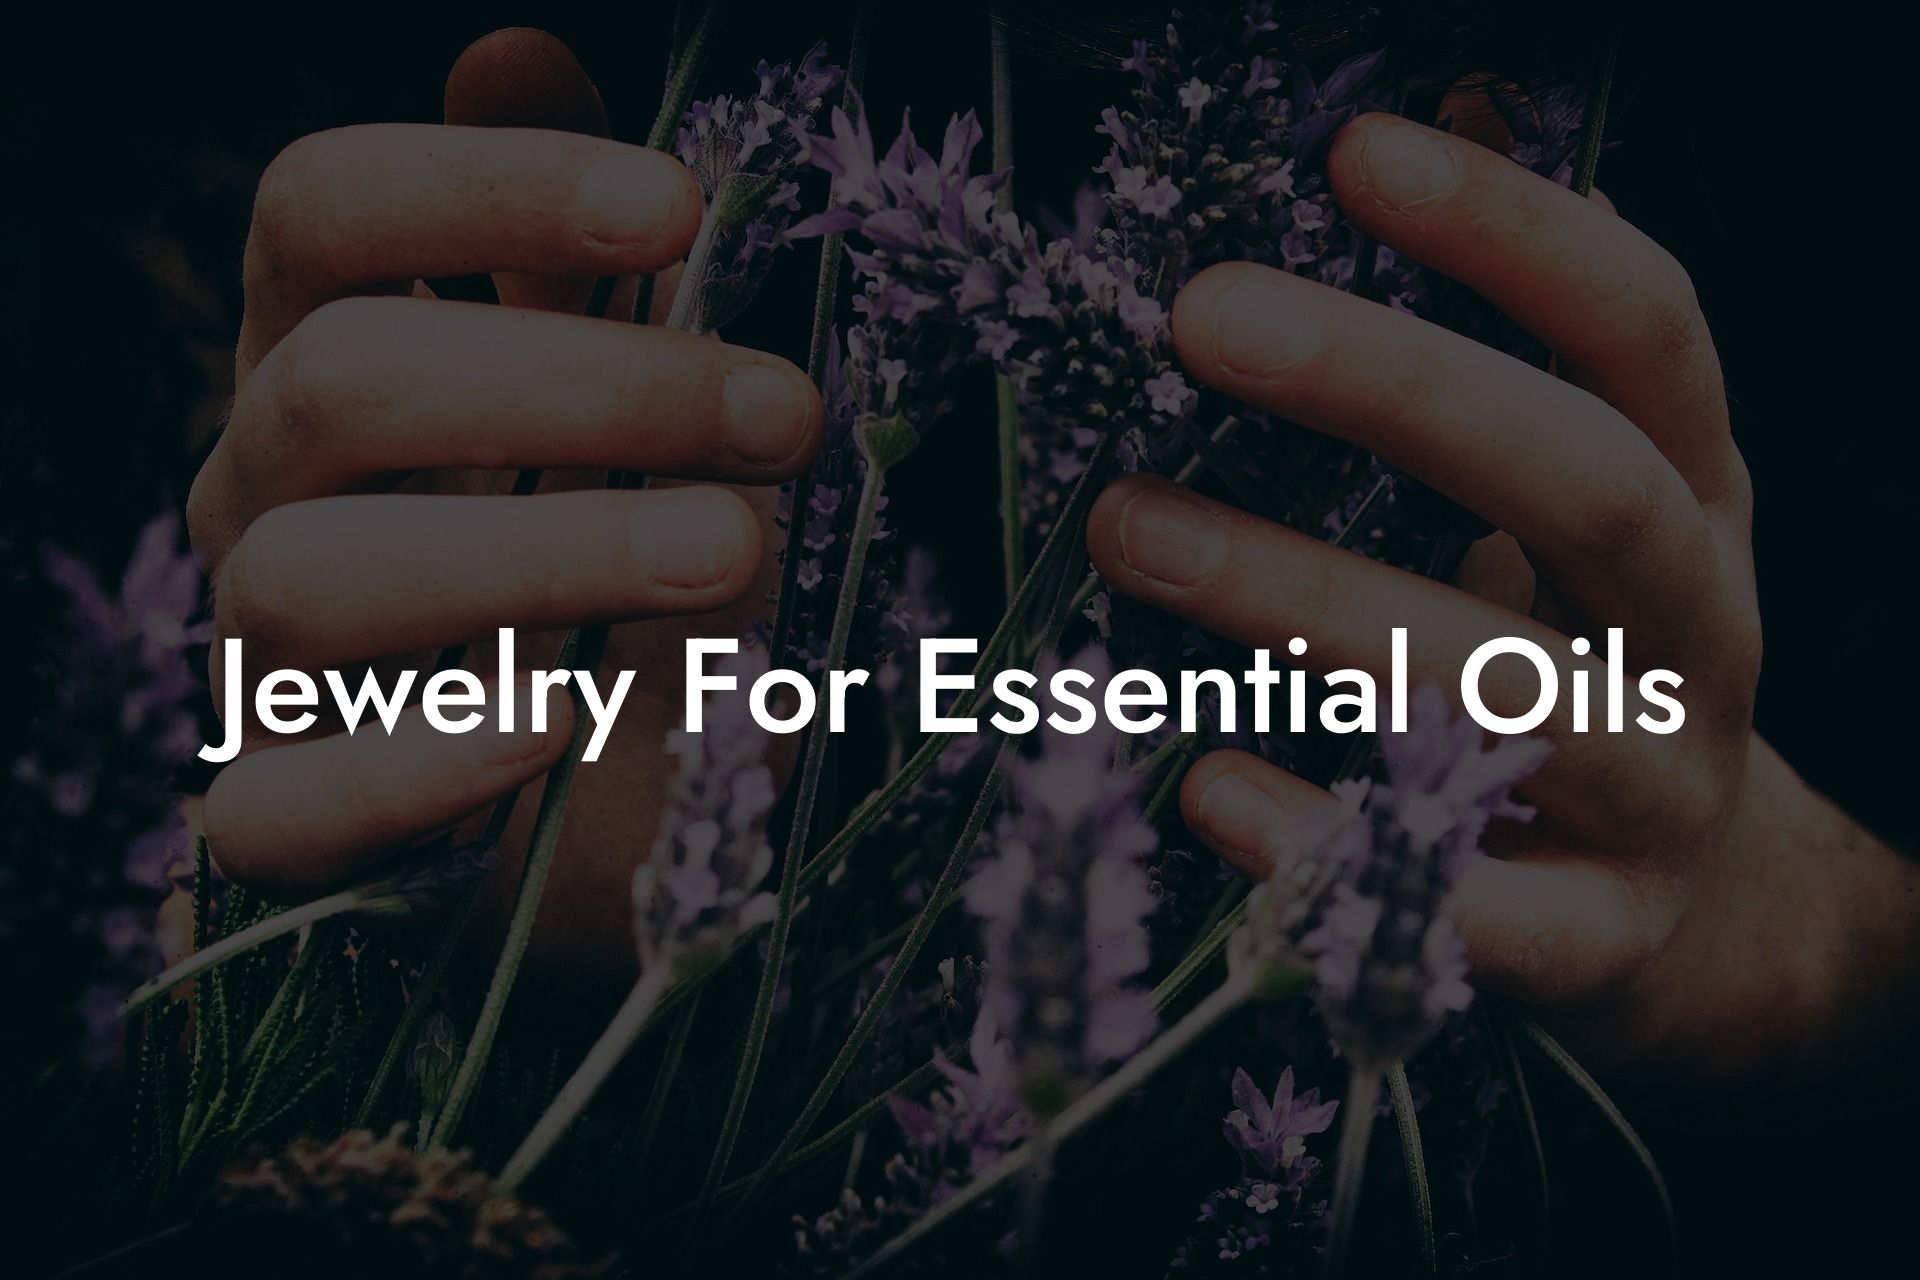 Jewelry For Essential Oils